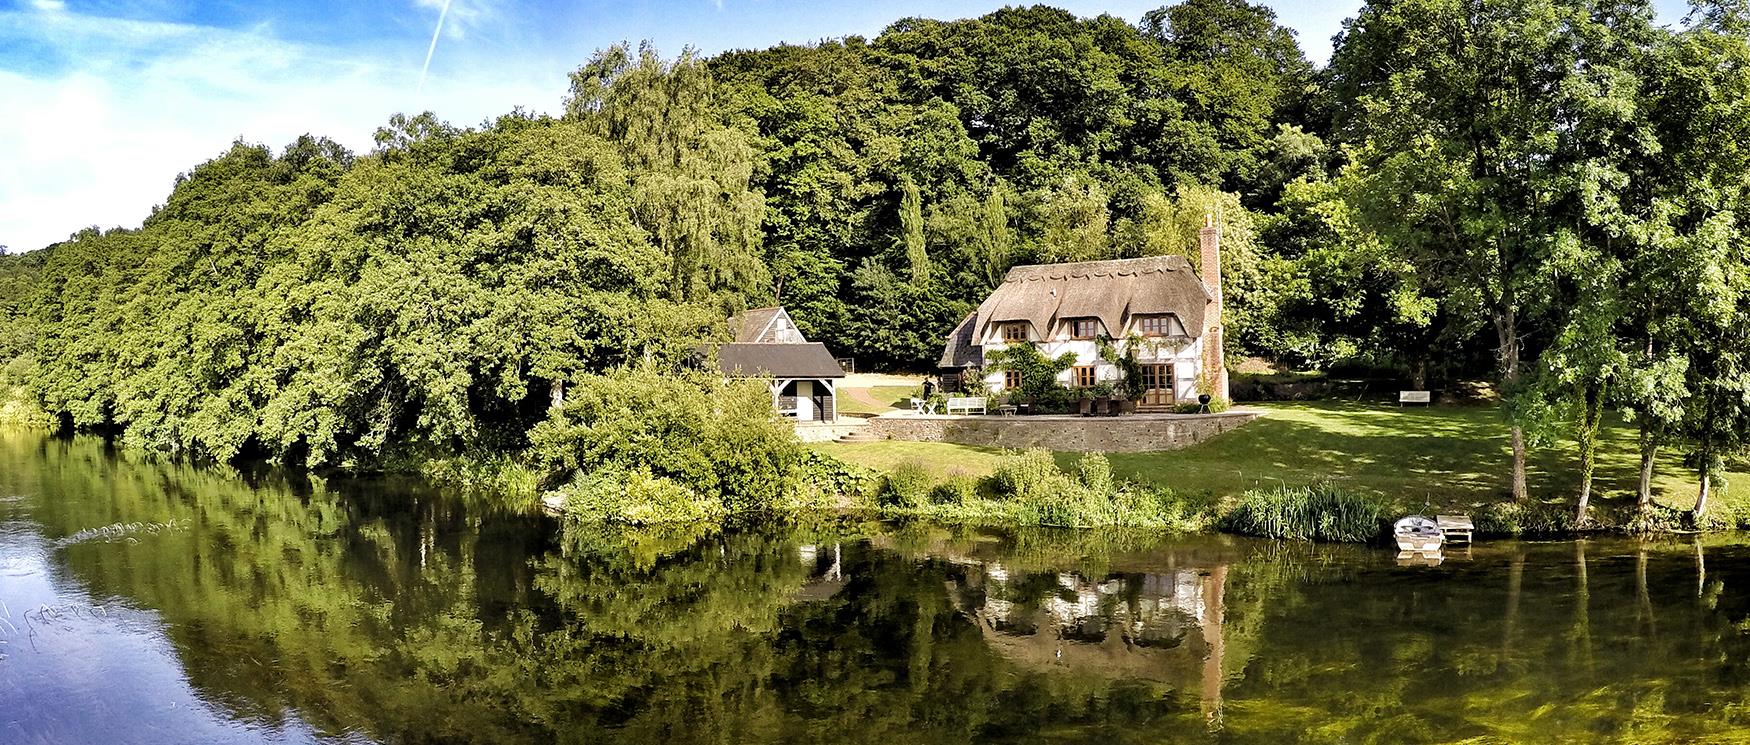 Self Catering Cottages in Hampshire